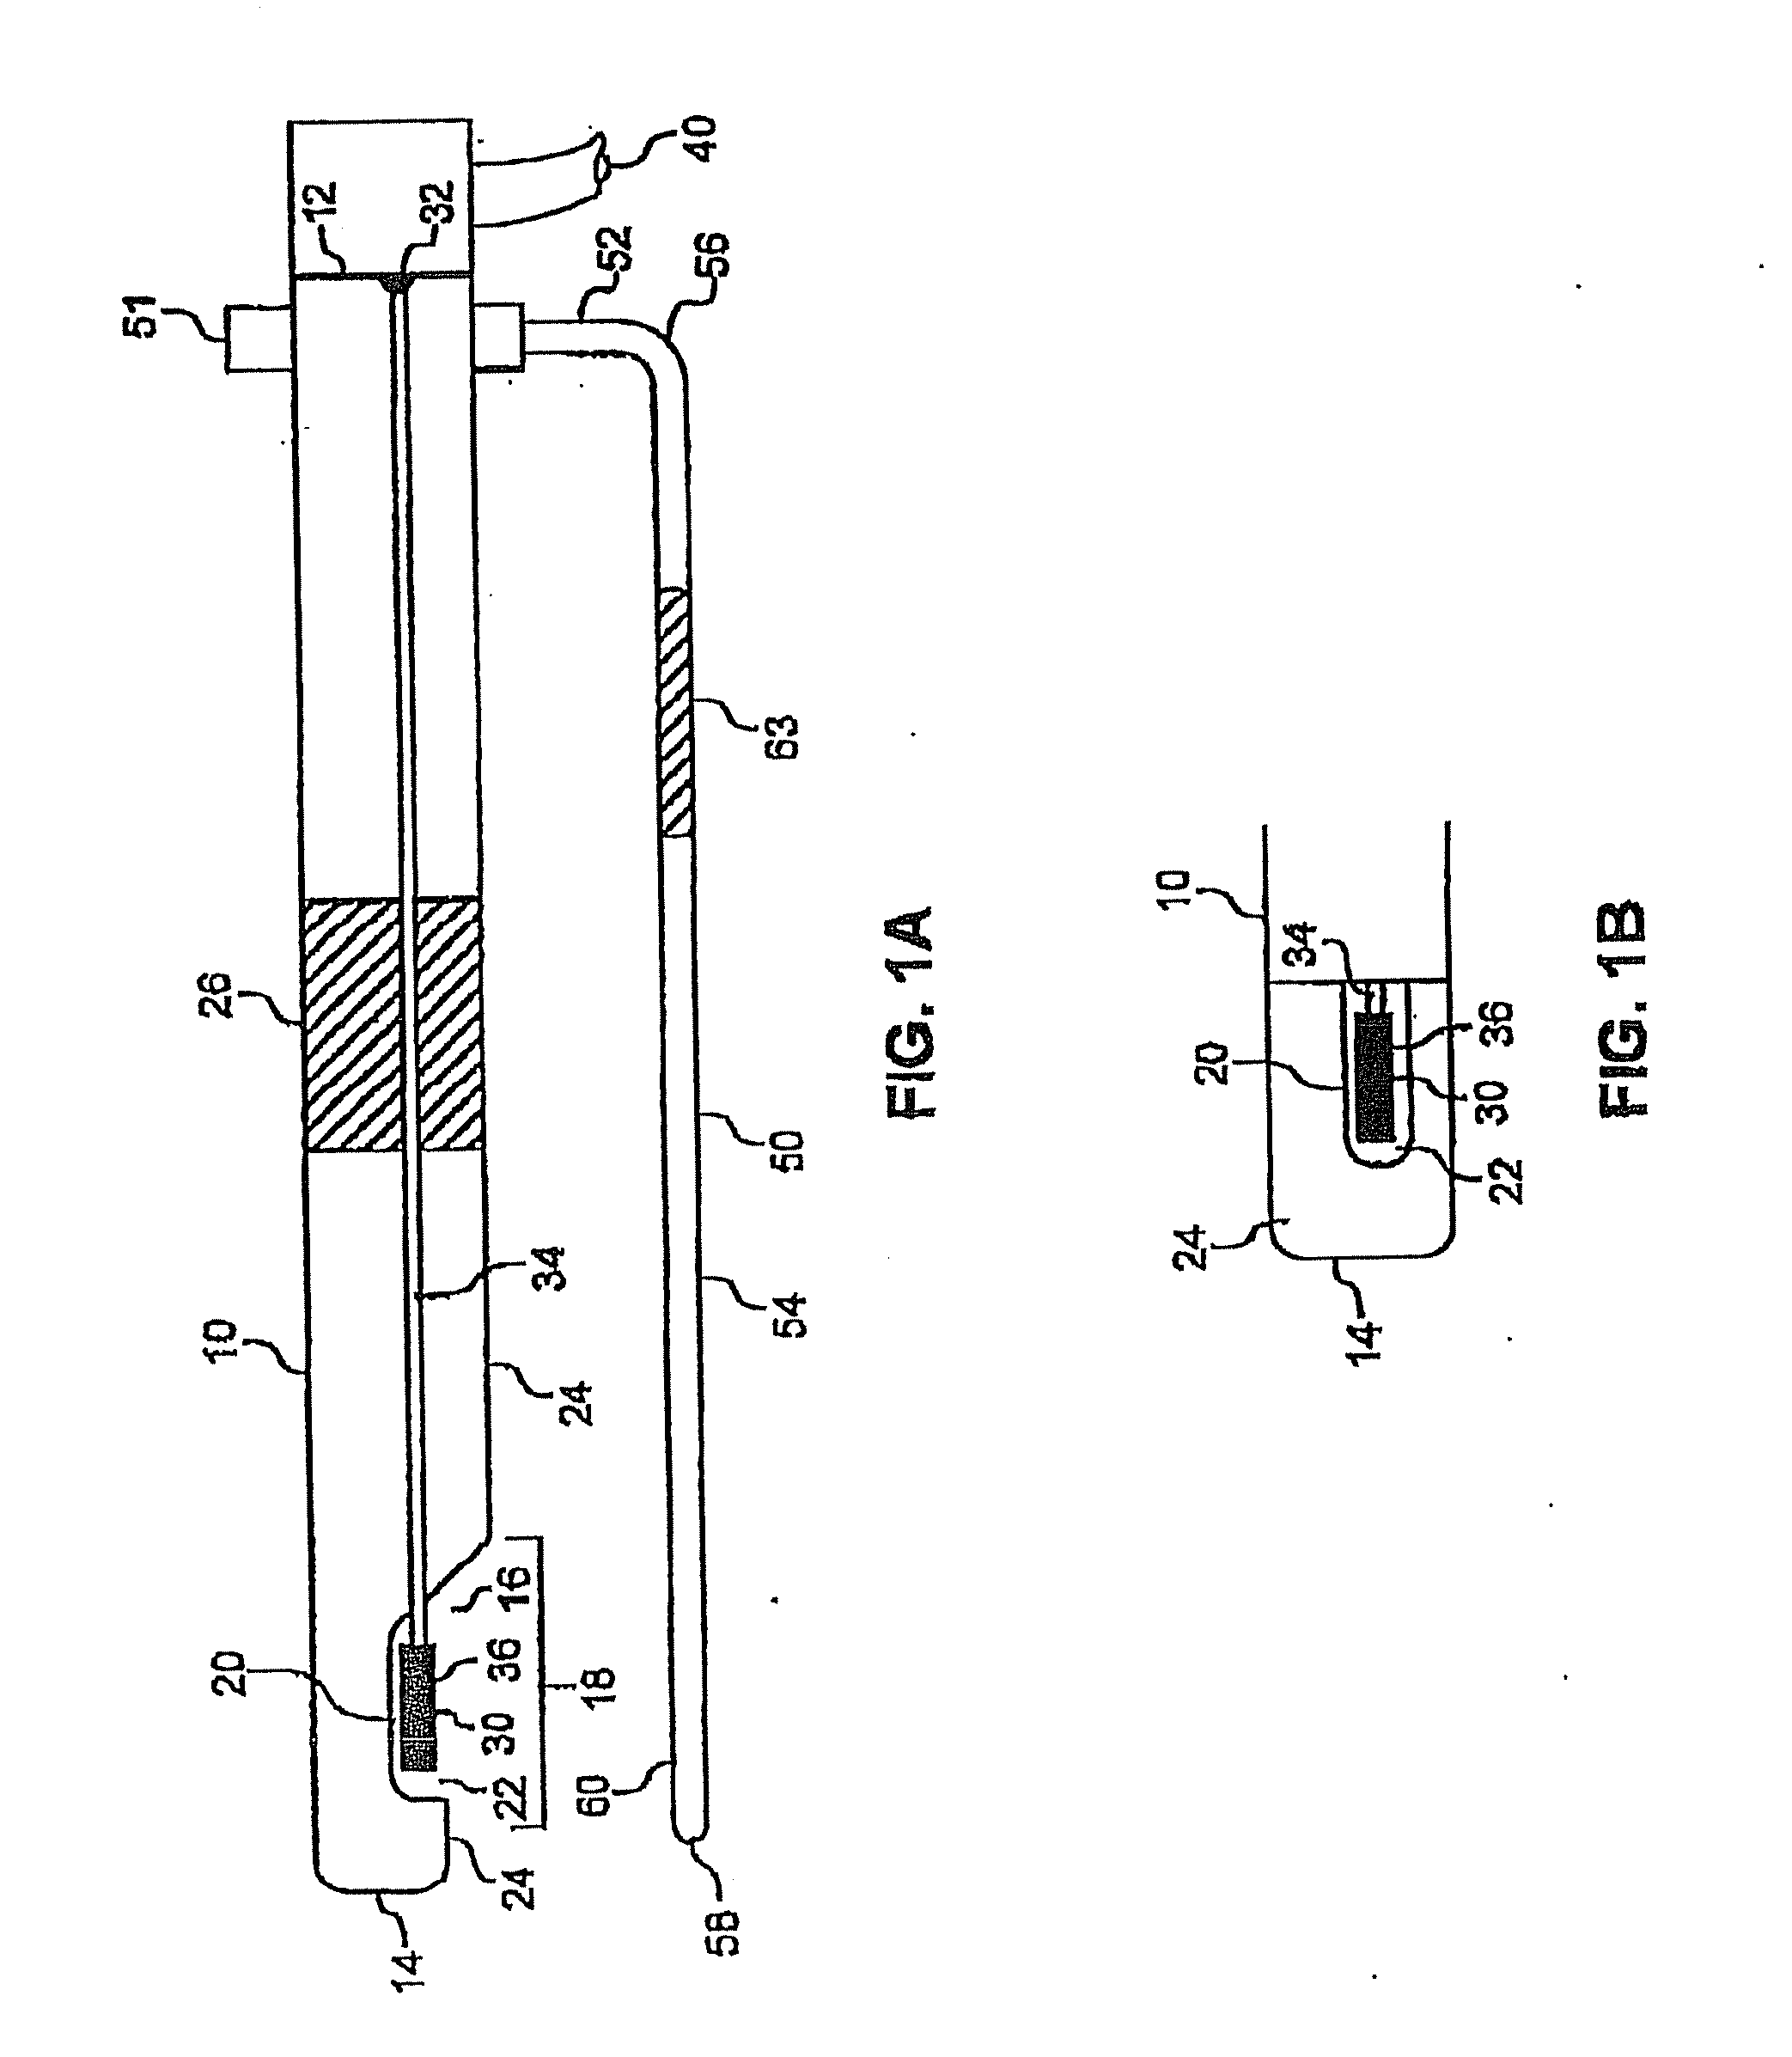 Noninvasive detection of a physiologic parameter with a probe